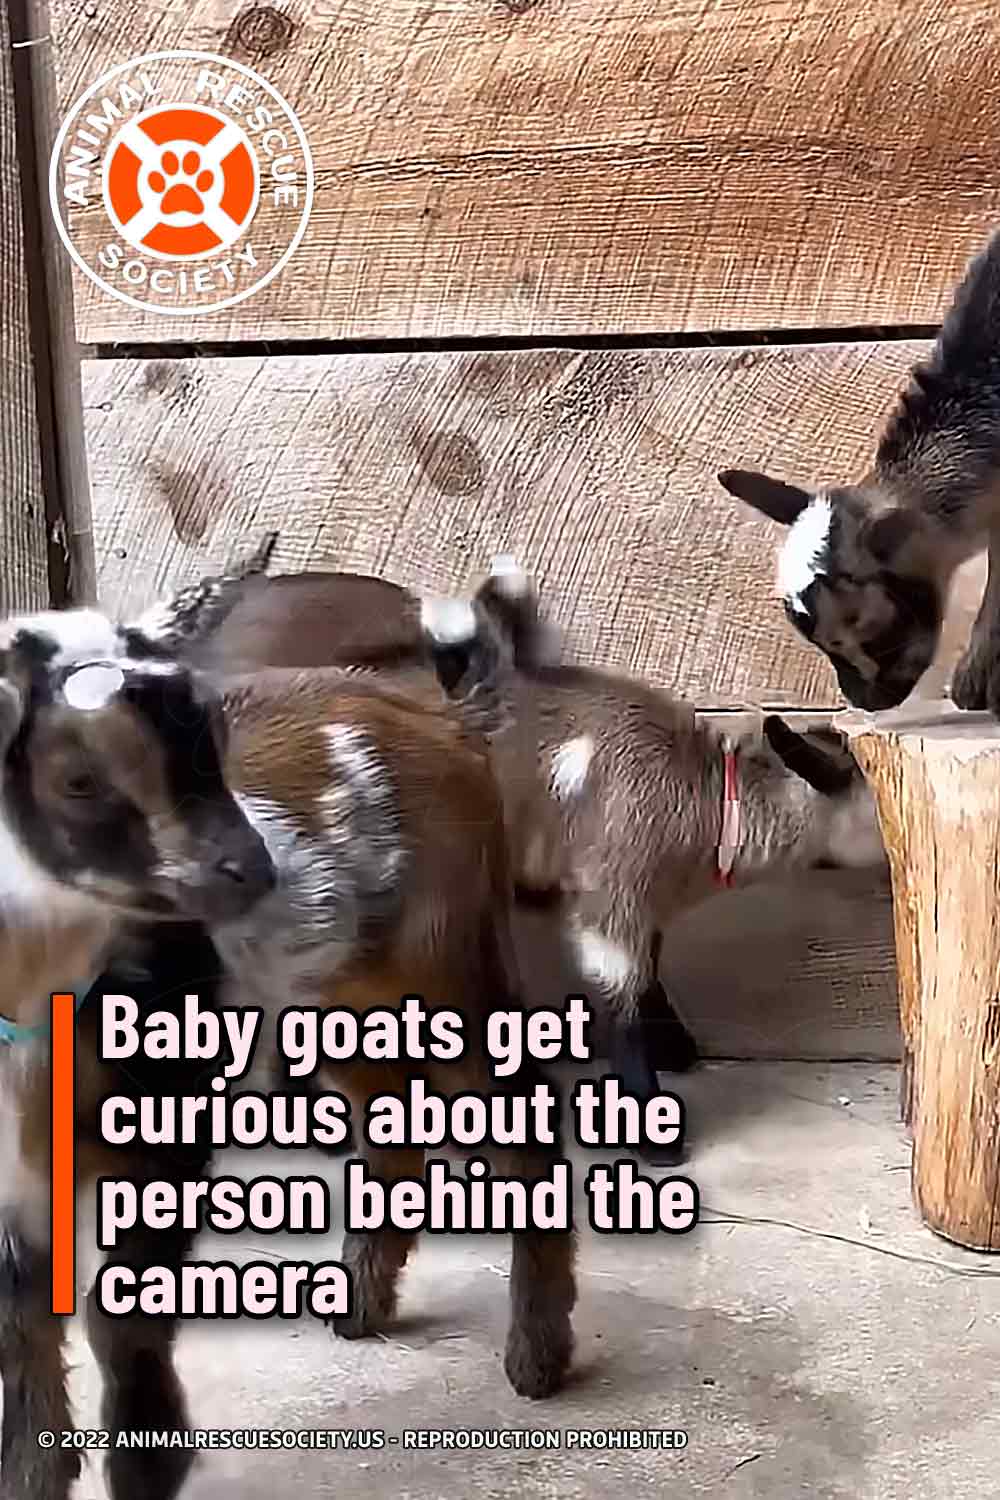 Baby goats get curious about the person behind the camera